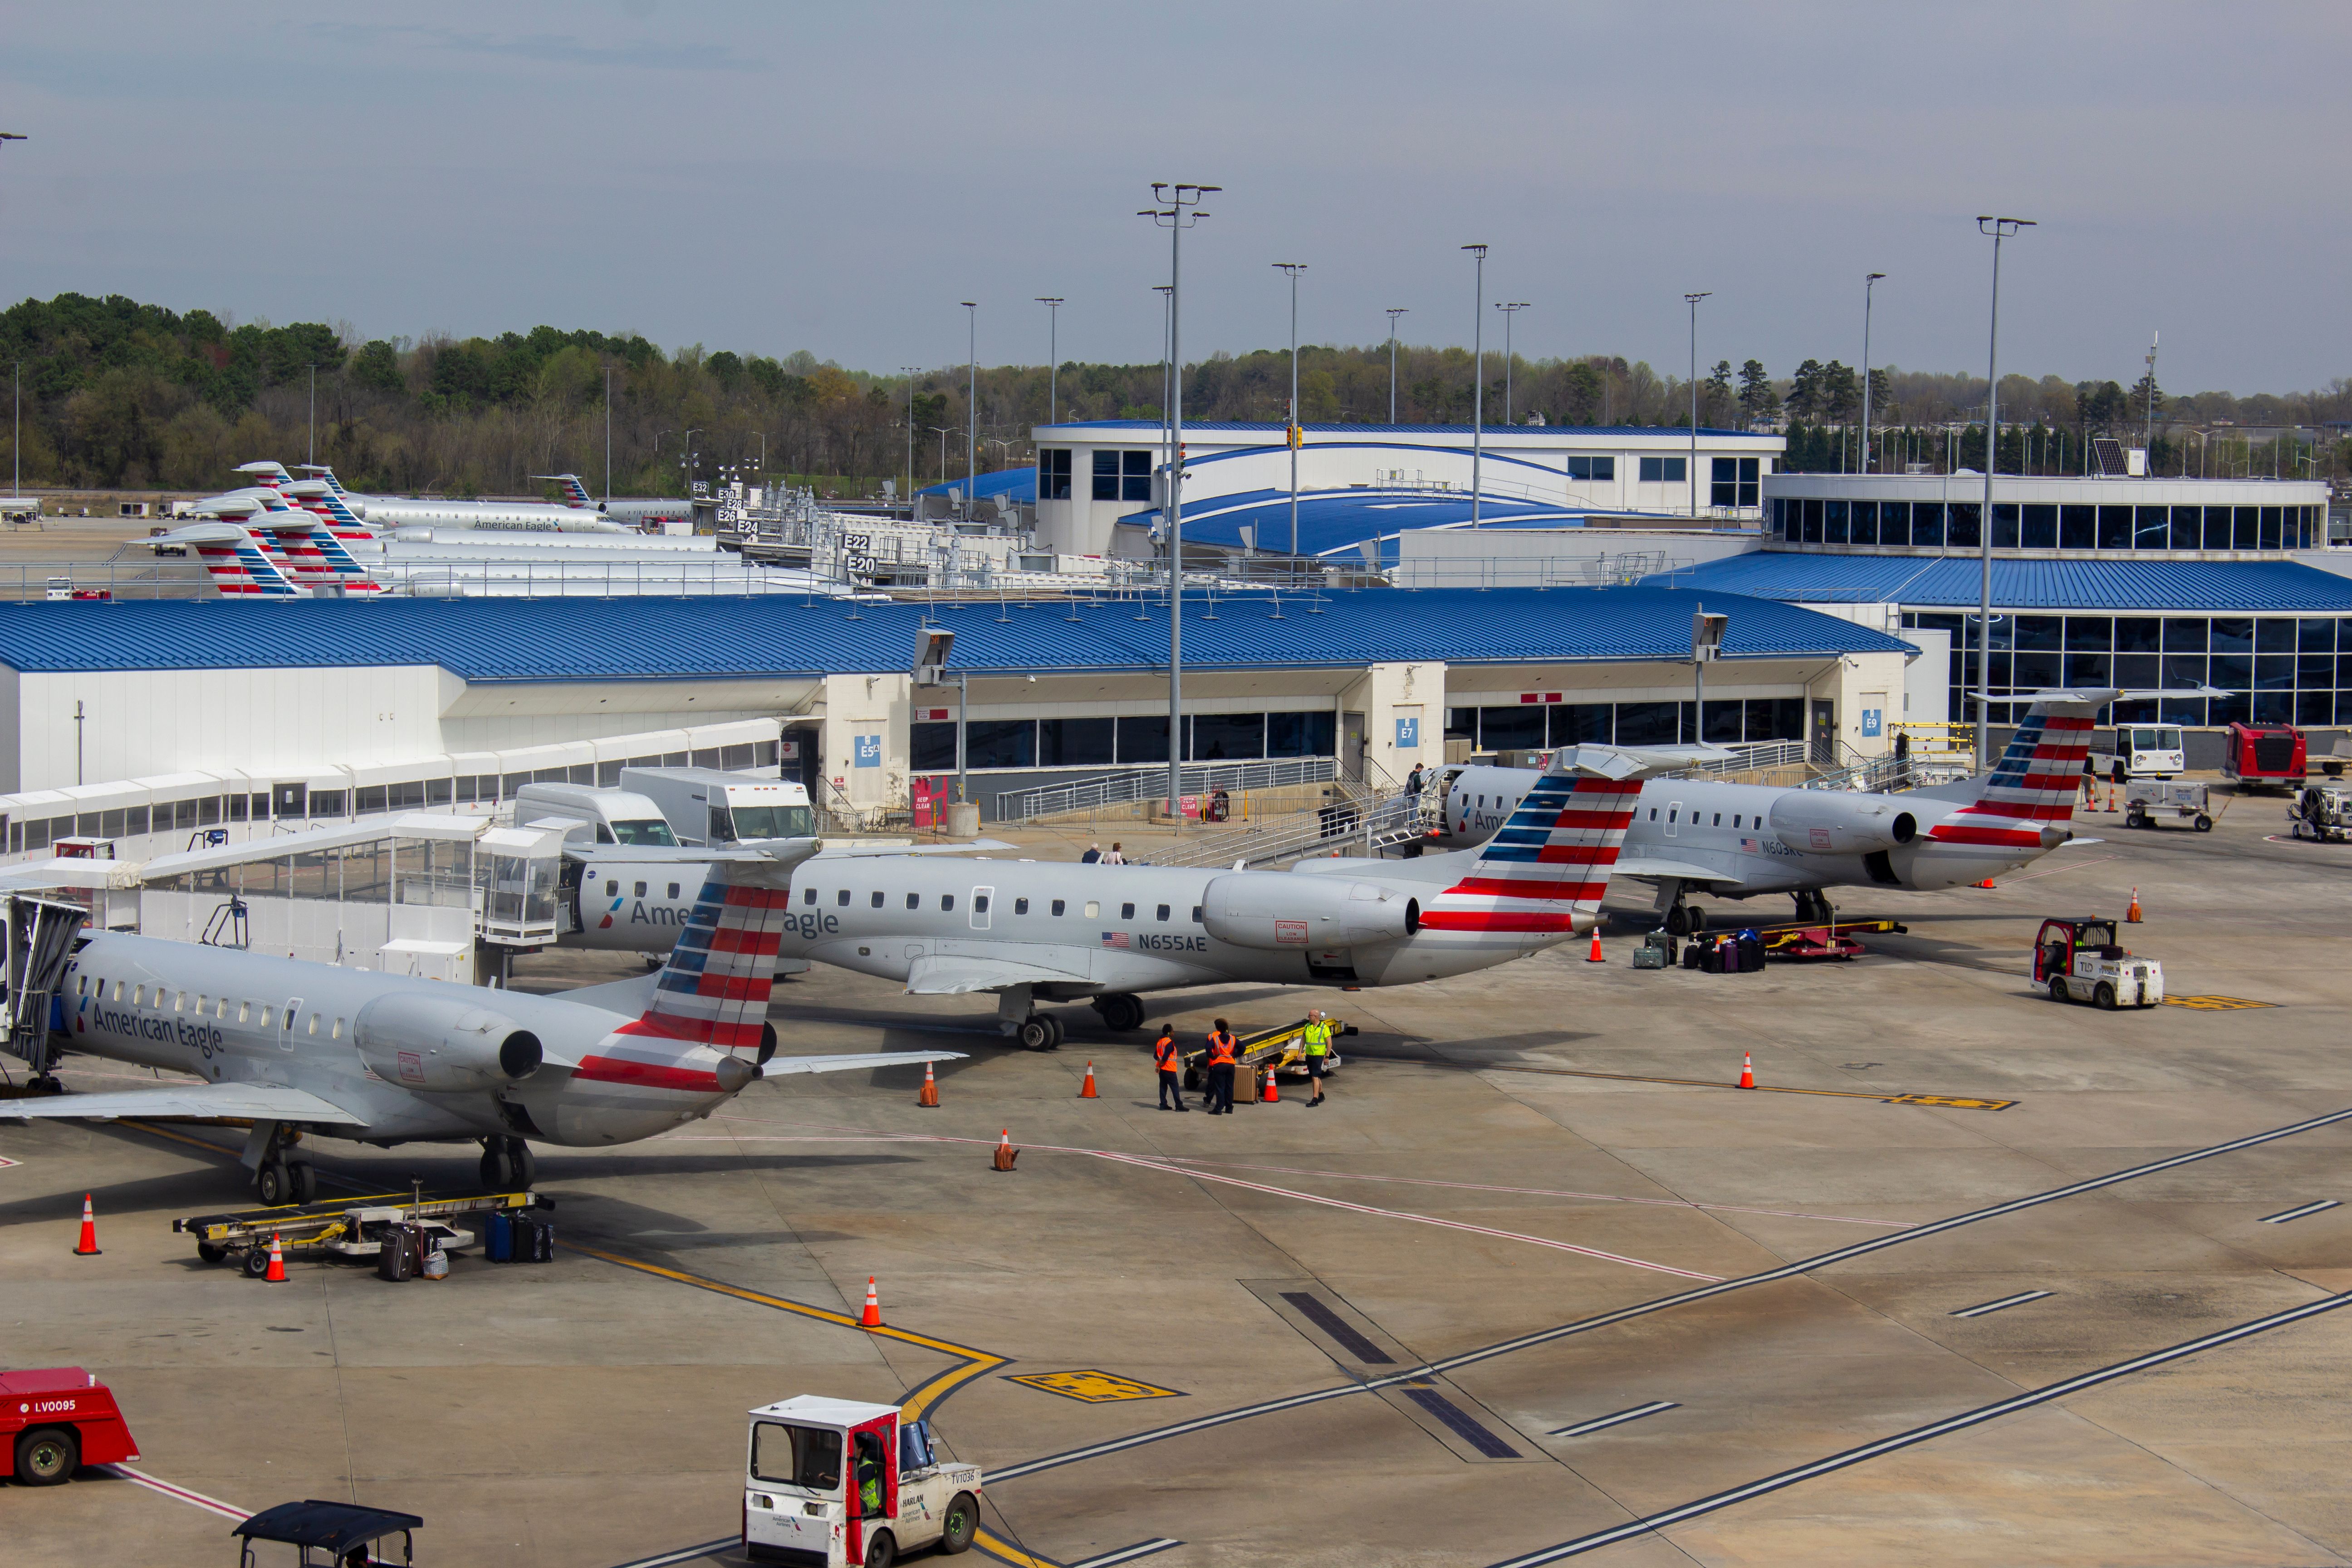 Several American Airlines regional aircraft parked at Charlotte Douglas Int'l.